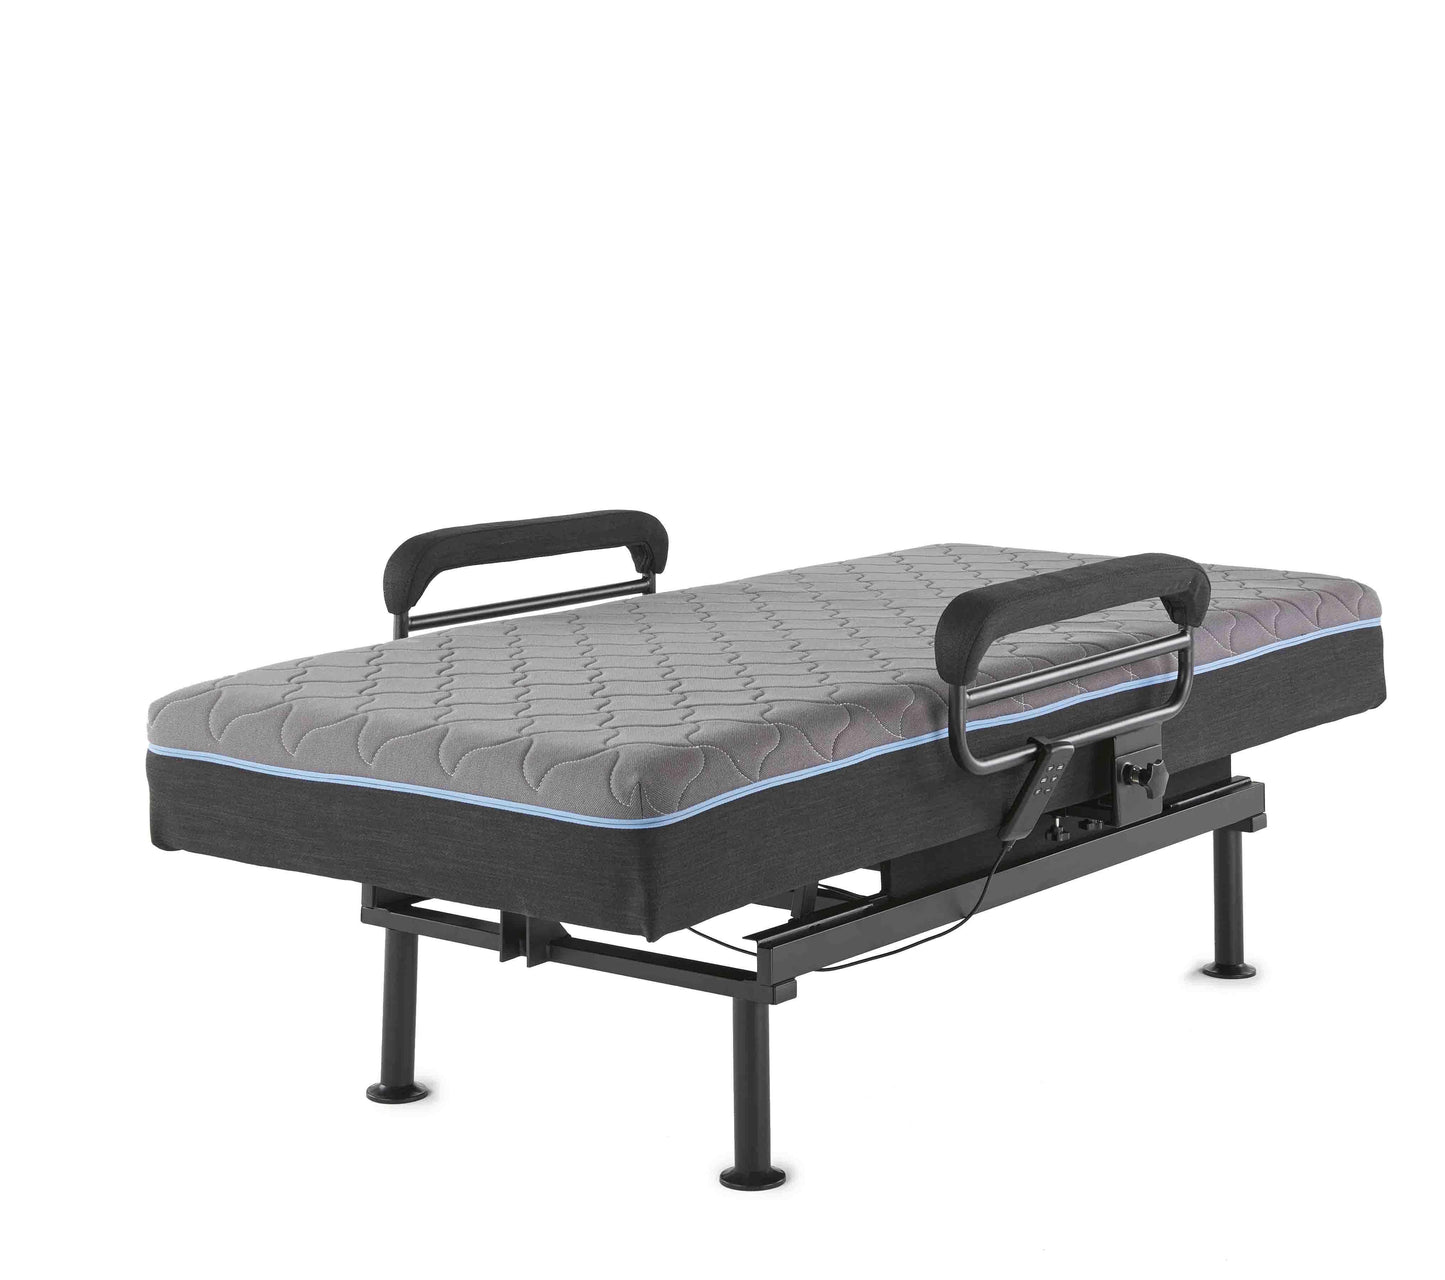 All-In-One EZ Out Bed - EasyOutBed.com